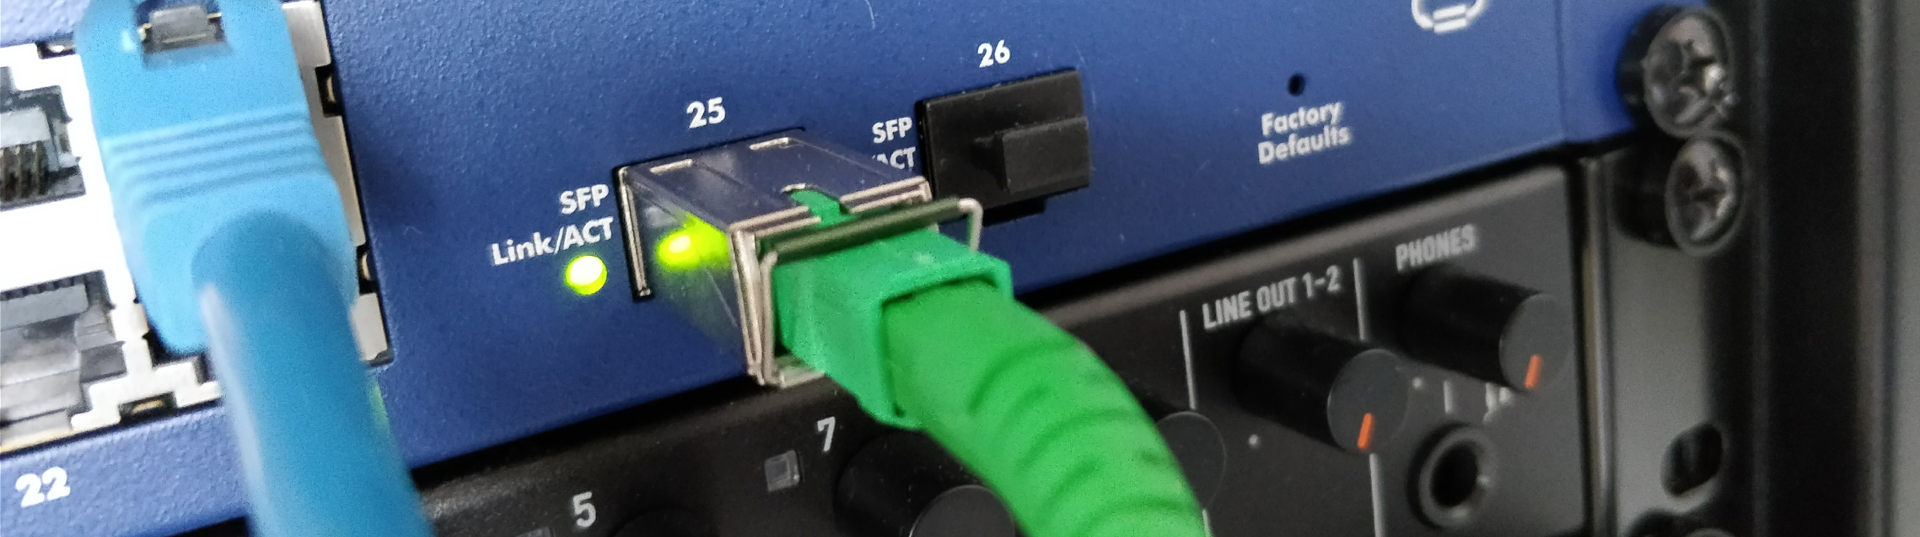 SFP plugged into a rackmount switch.